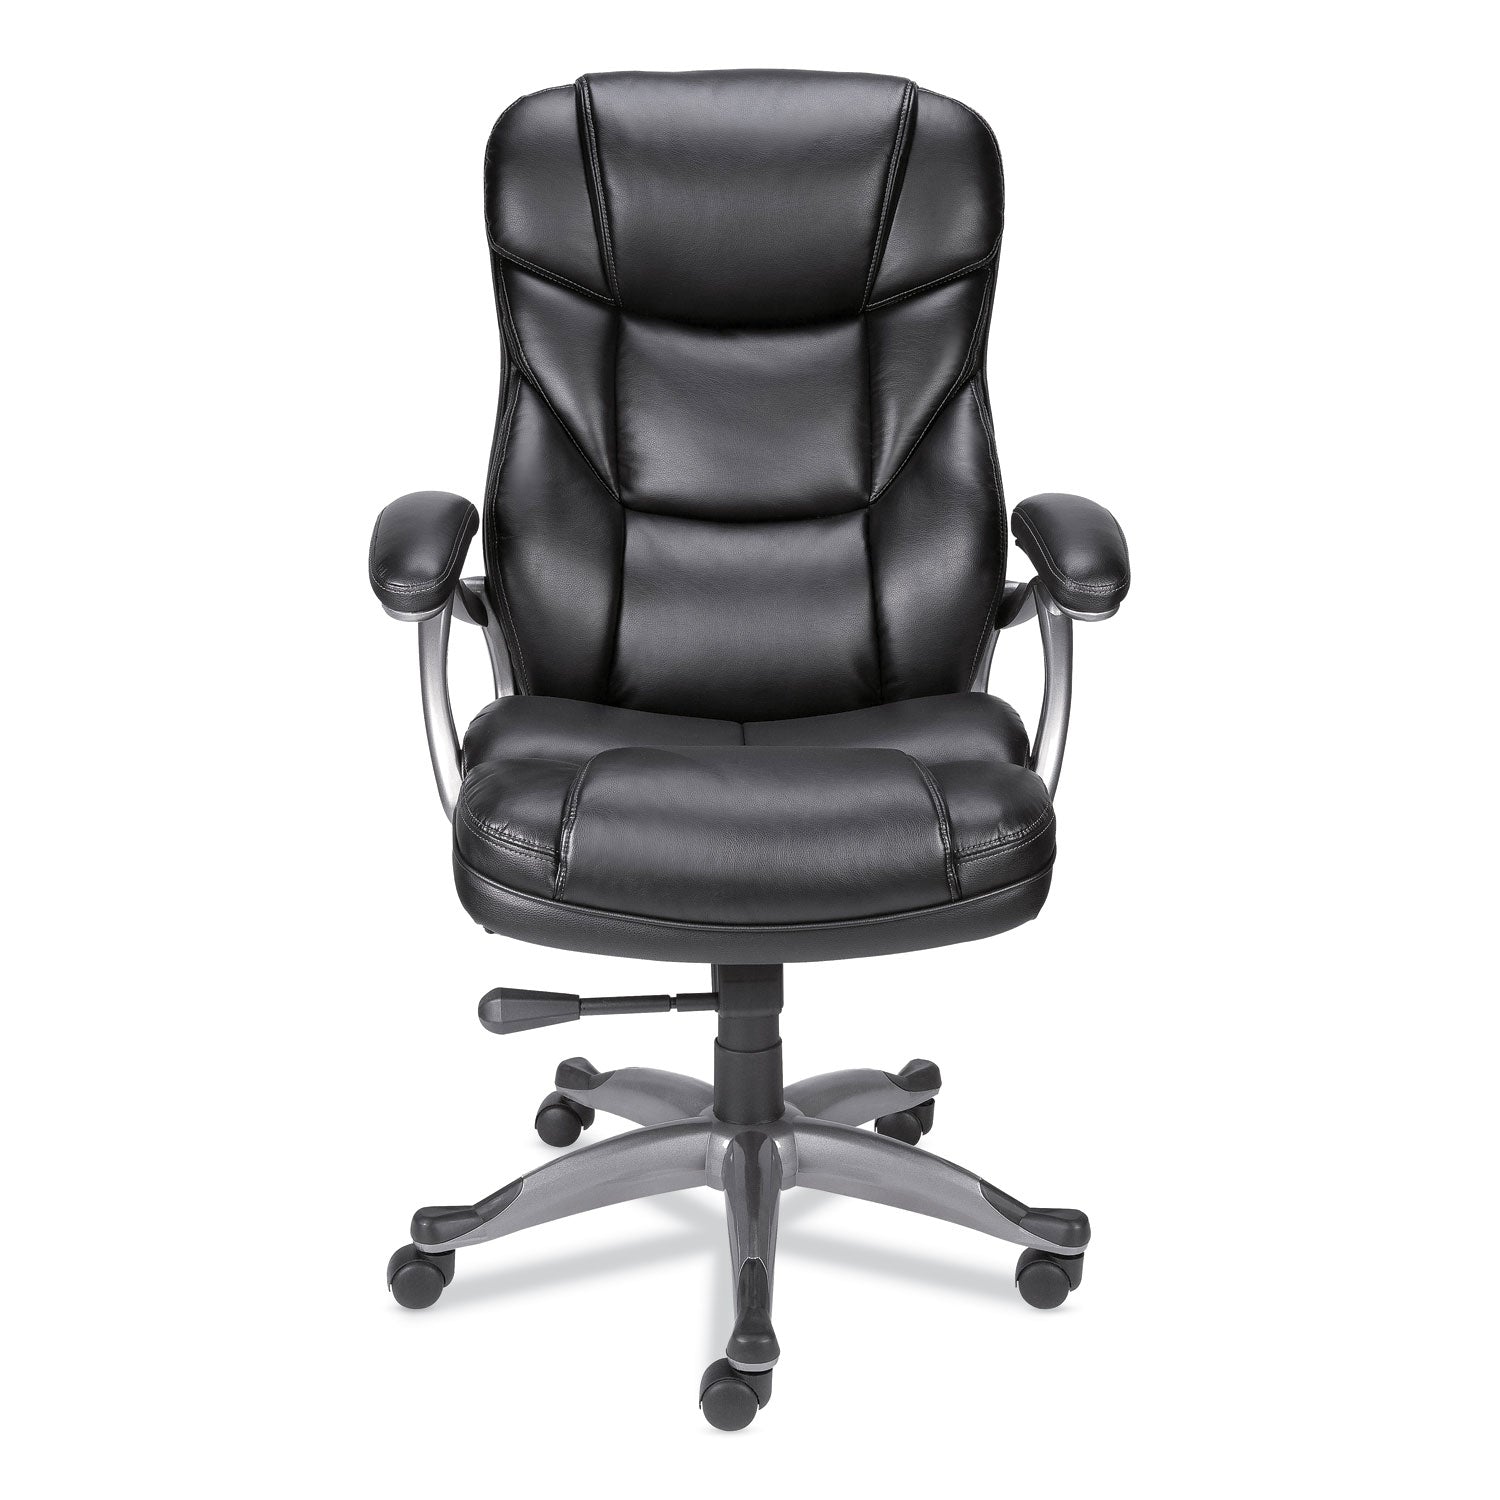 alera-birns-series-high-back-task-chair-supports-up-to-250-lb-1811-to-2205-seat-height-black-seat-back-chrome-base_alebn41b19 - 1